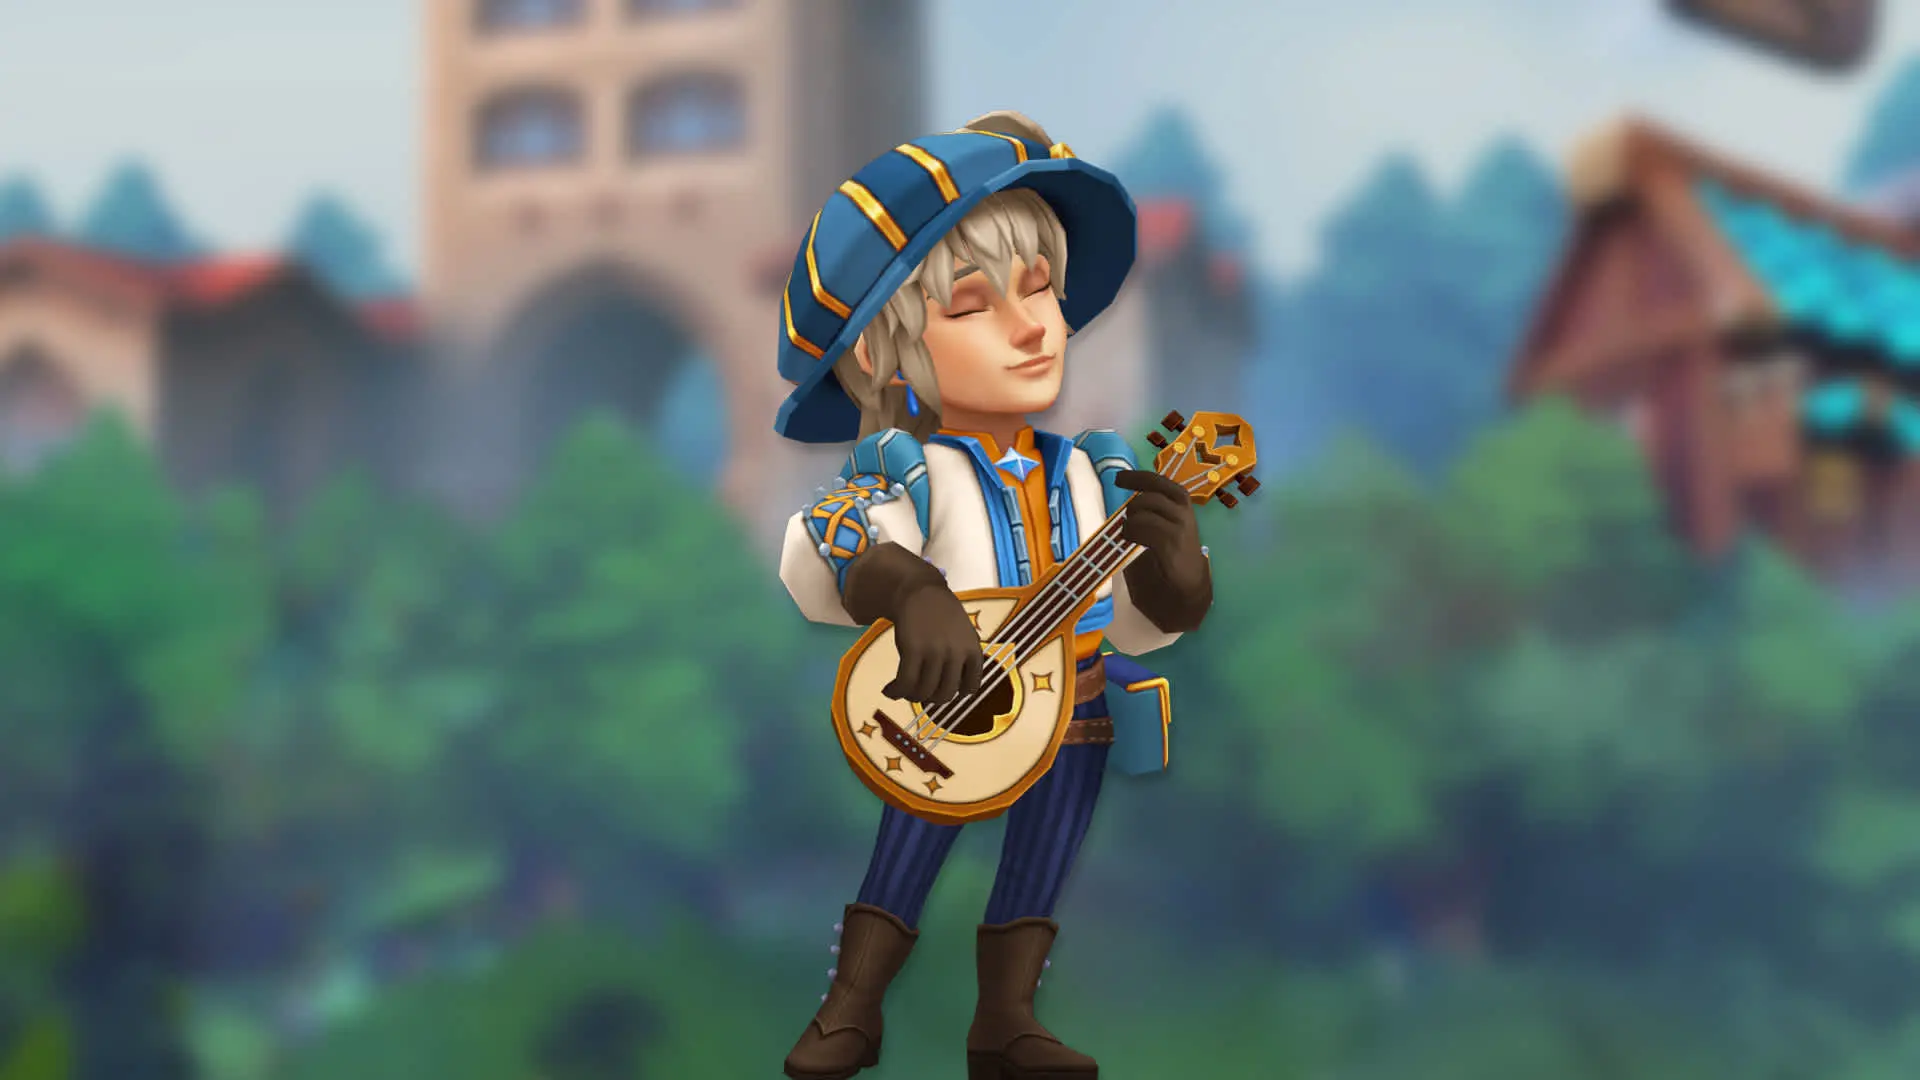 The new premium worker Yohan, the Bard.